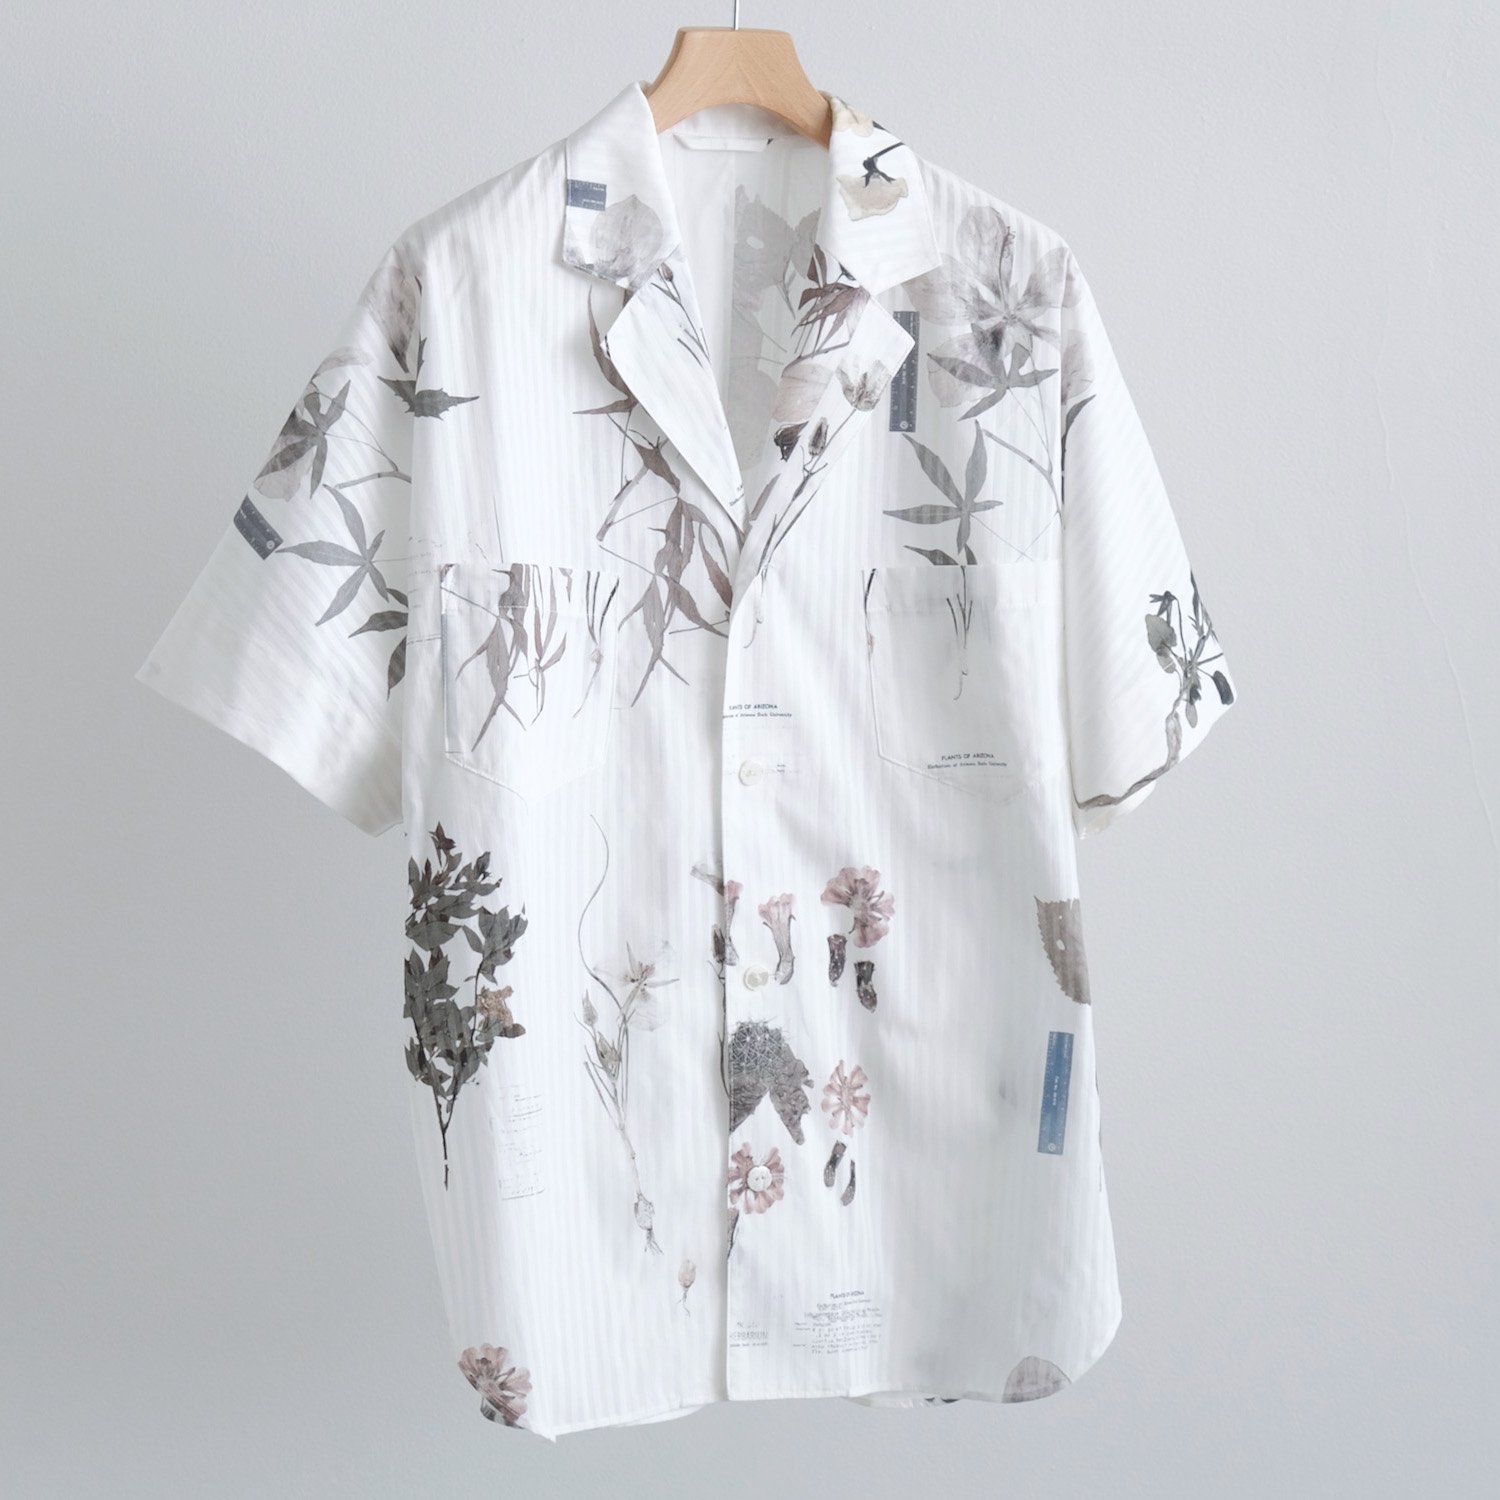 SOUTHERN FRENCH SHIRT [ETERNAL FLOWERS]